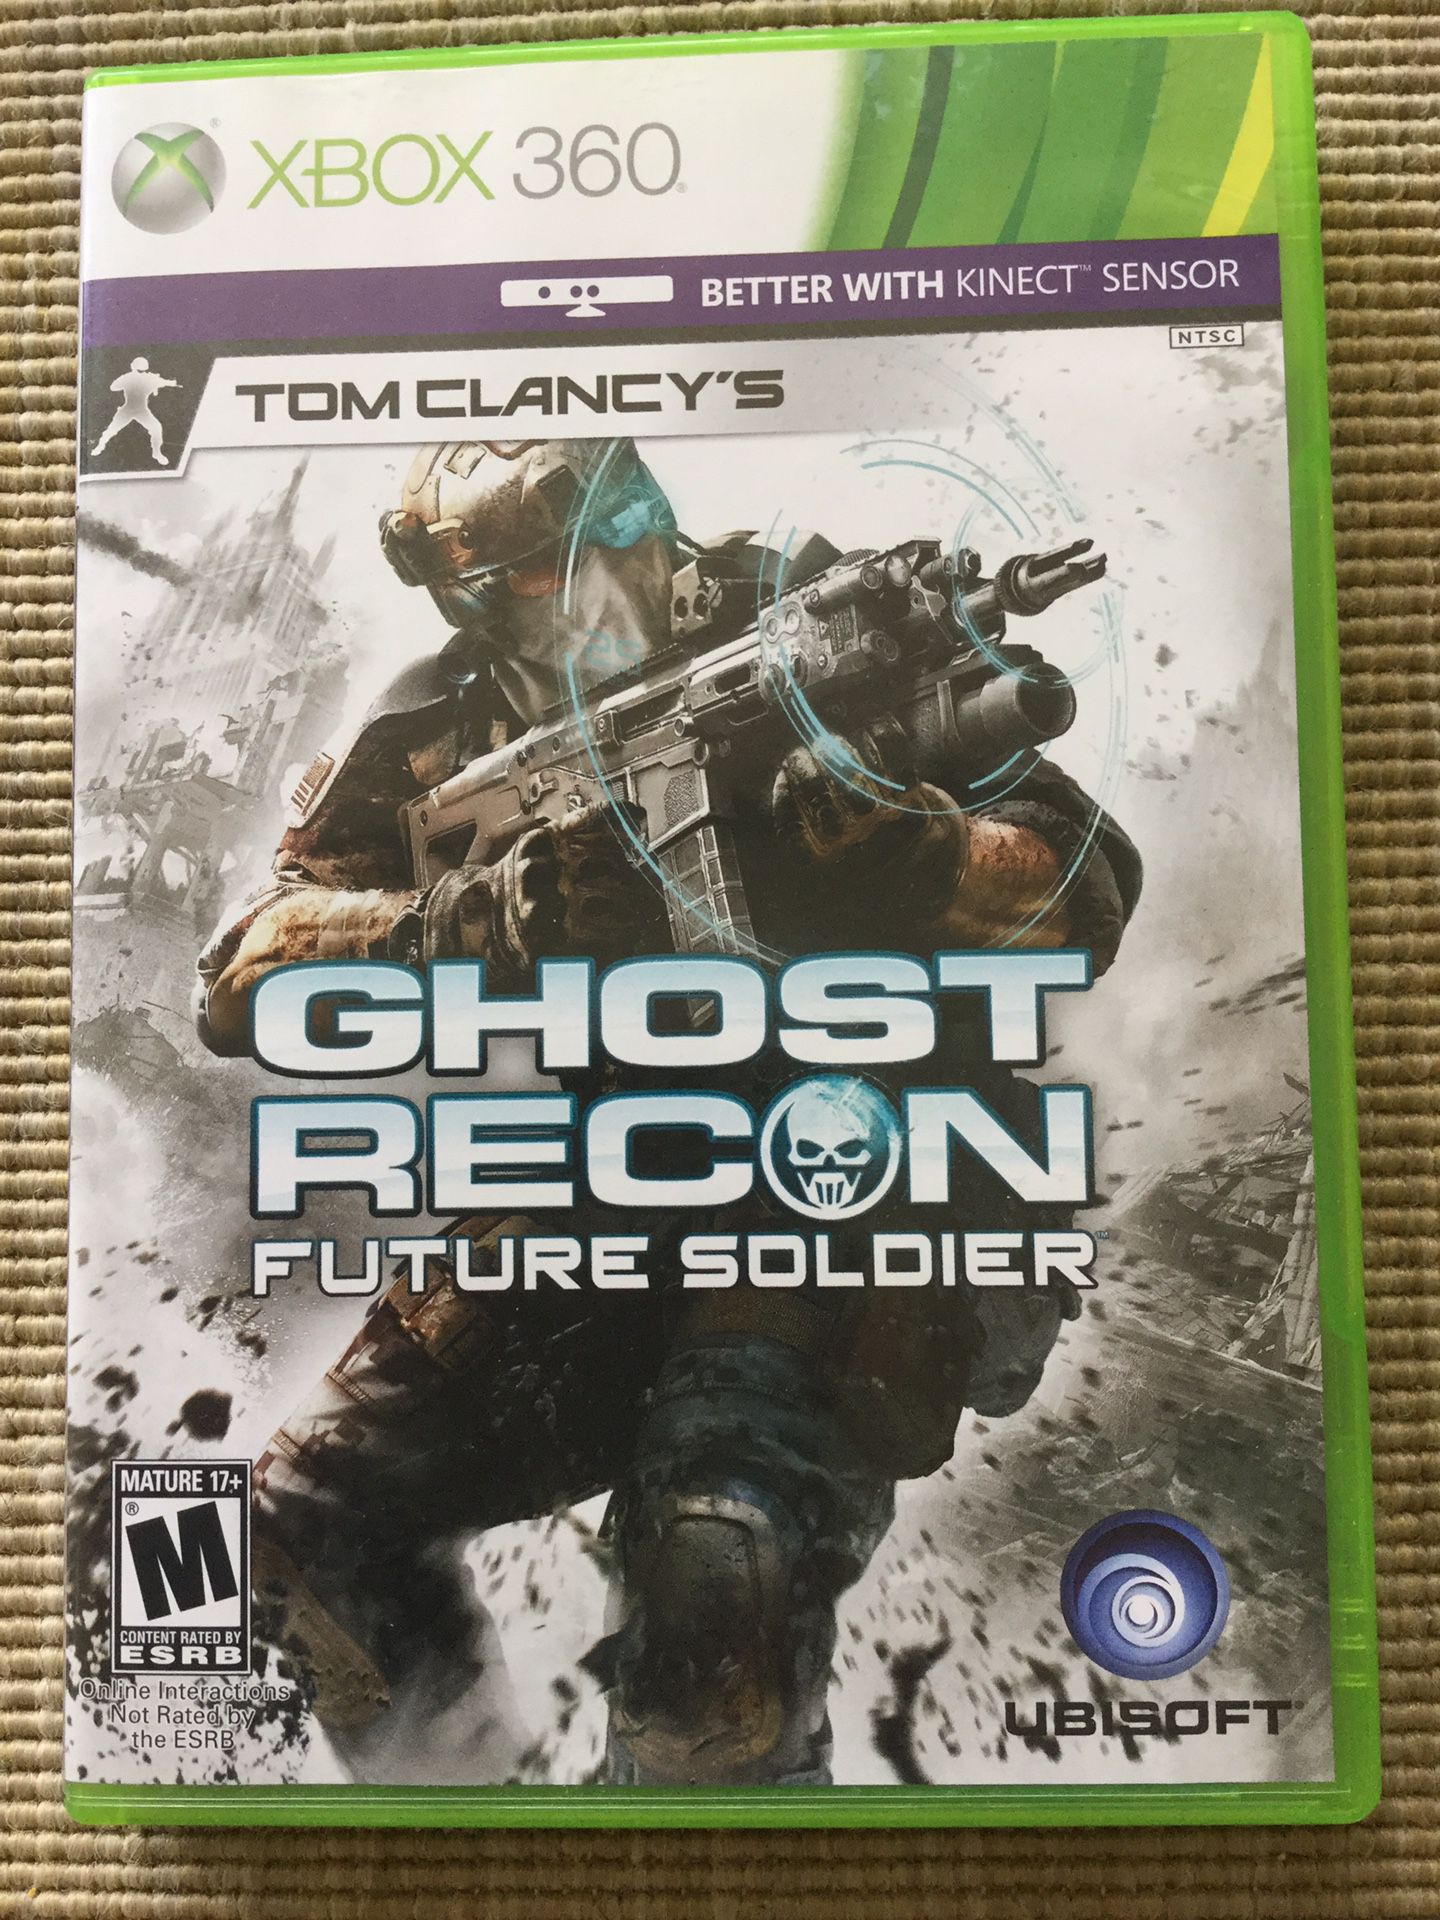 Original XBOX 360 Video Games / Come visit / Ghost Recon - Future Solder - Tom Clancy / Visit for more games 🤓🎮